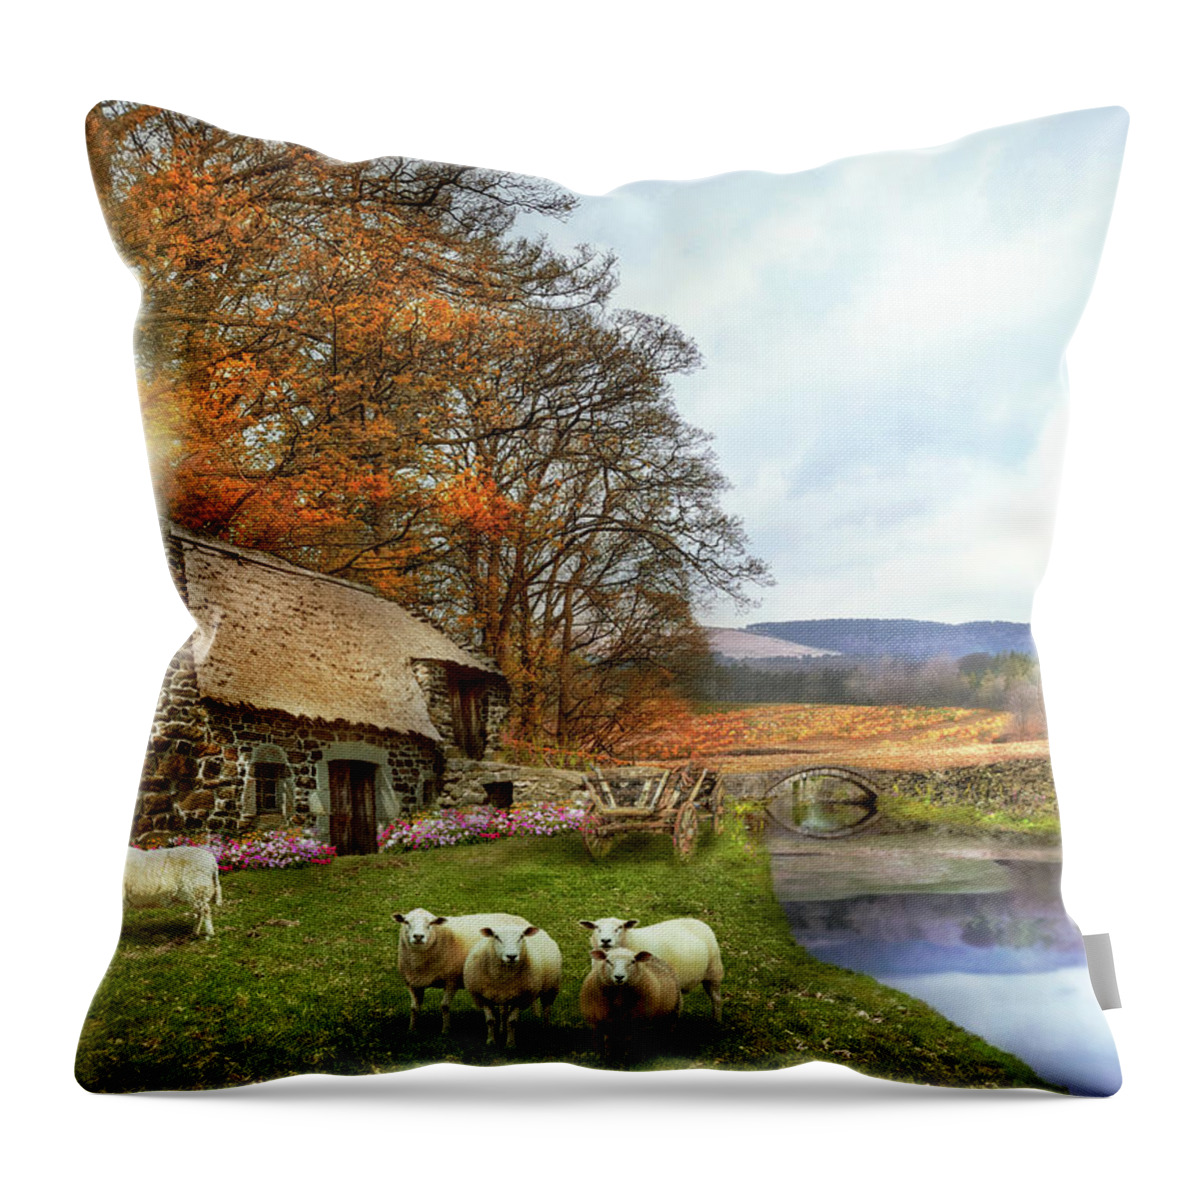 Autumn Throw Pillow featuring the photograph Autumn - Tranquility of Autumn by Mike Savad